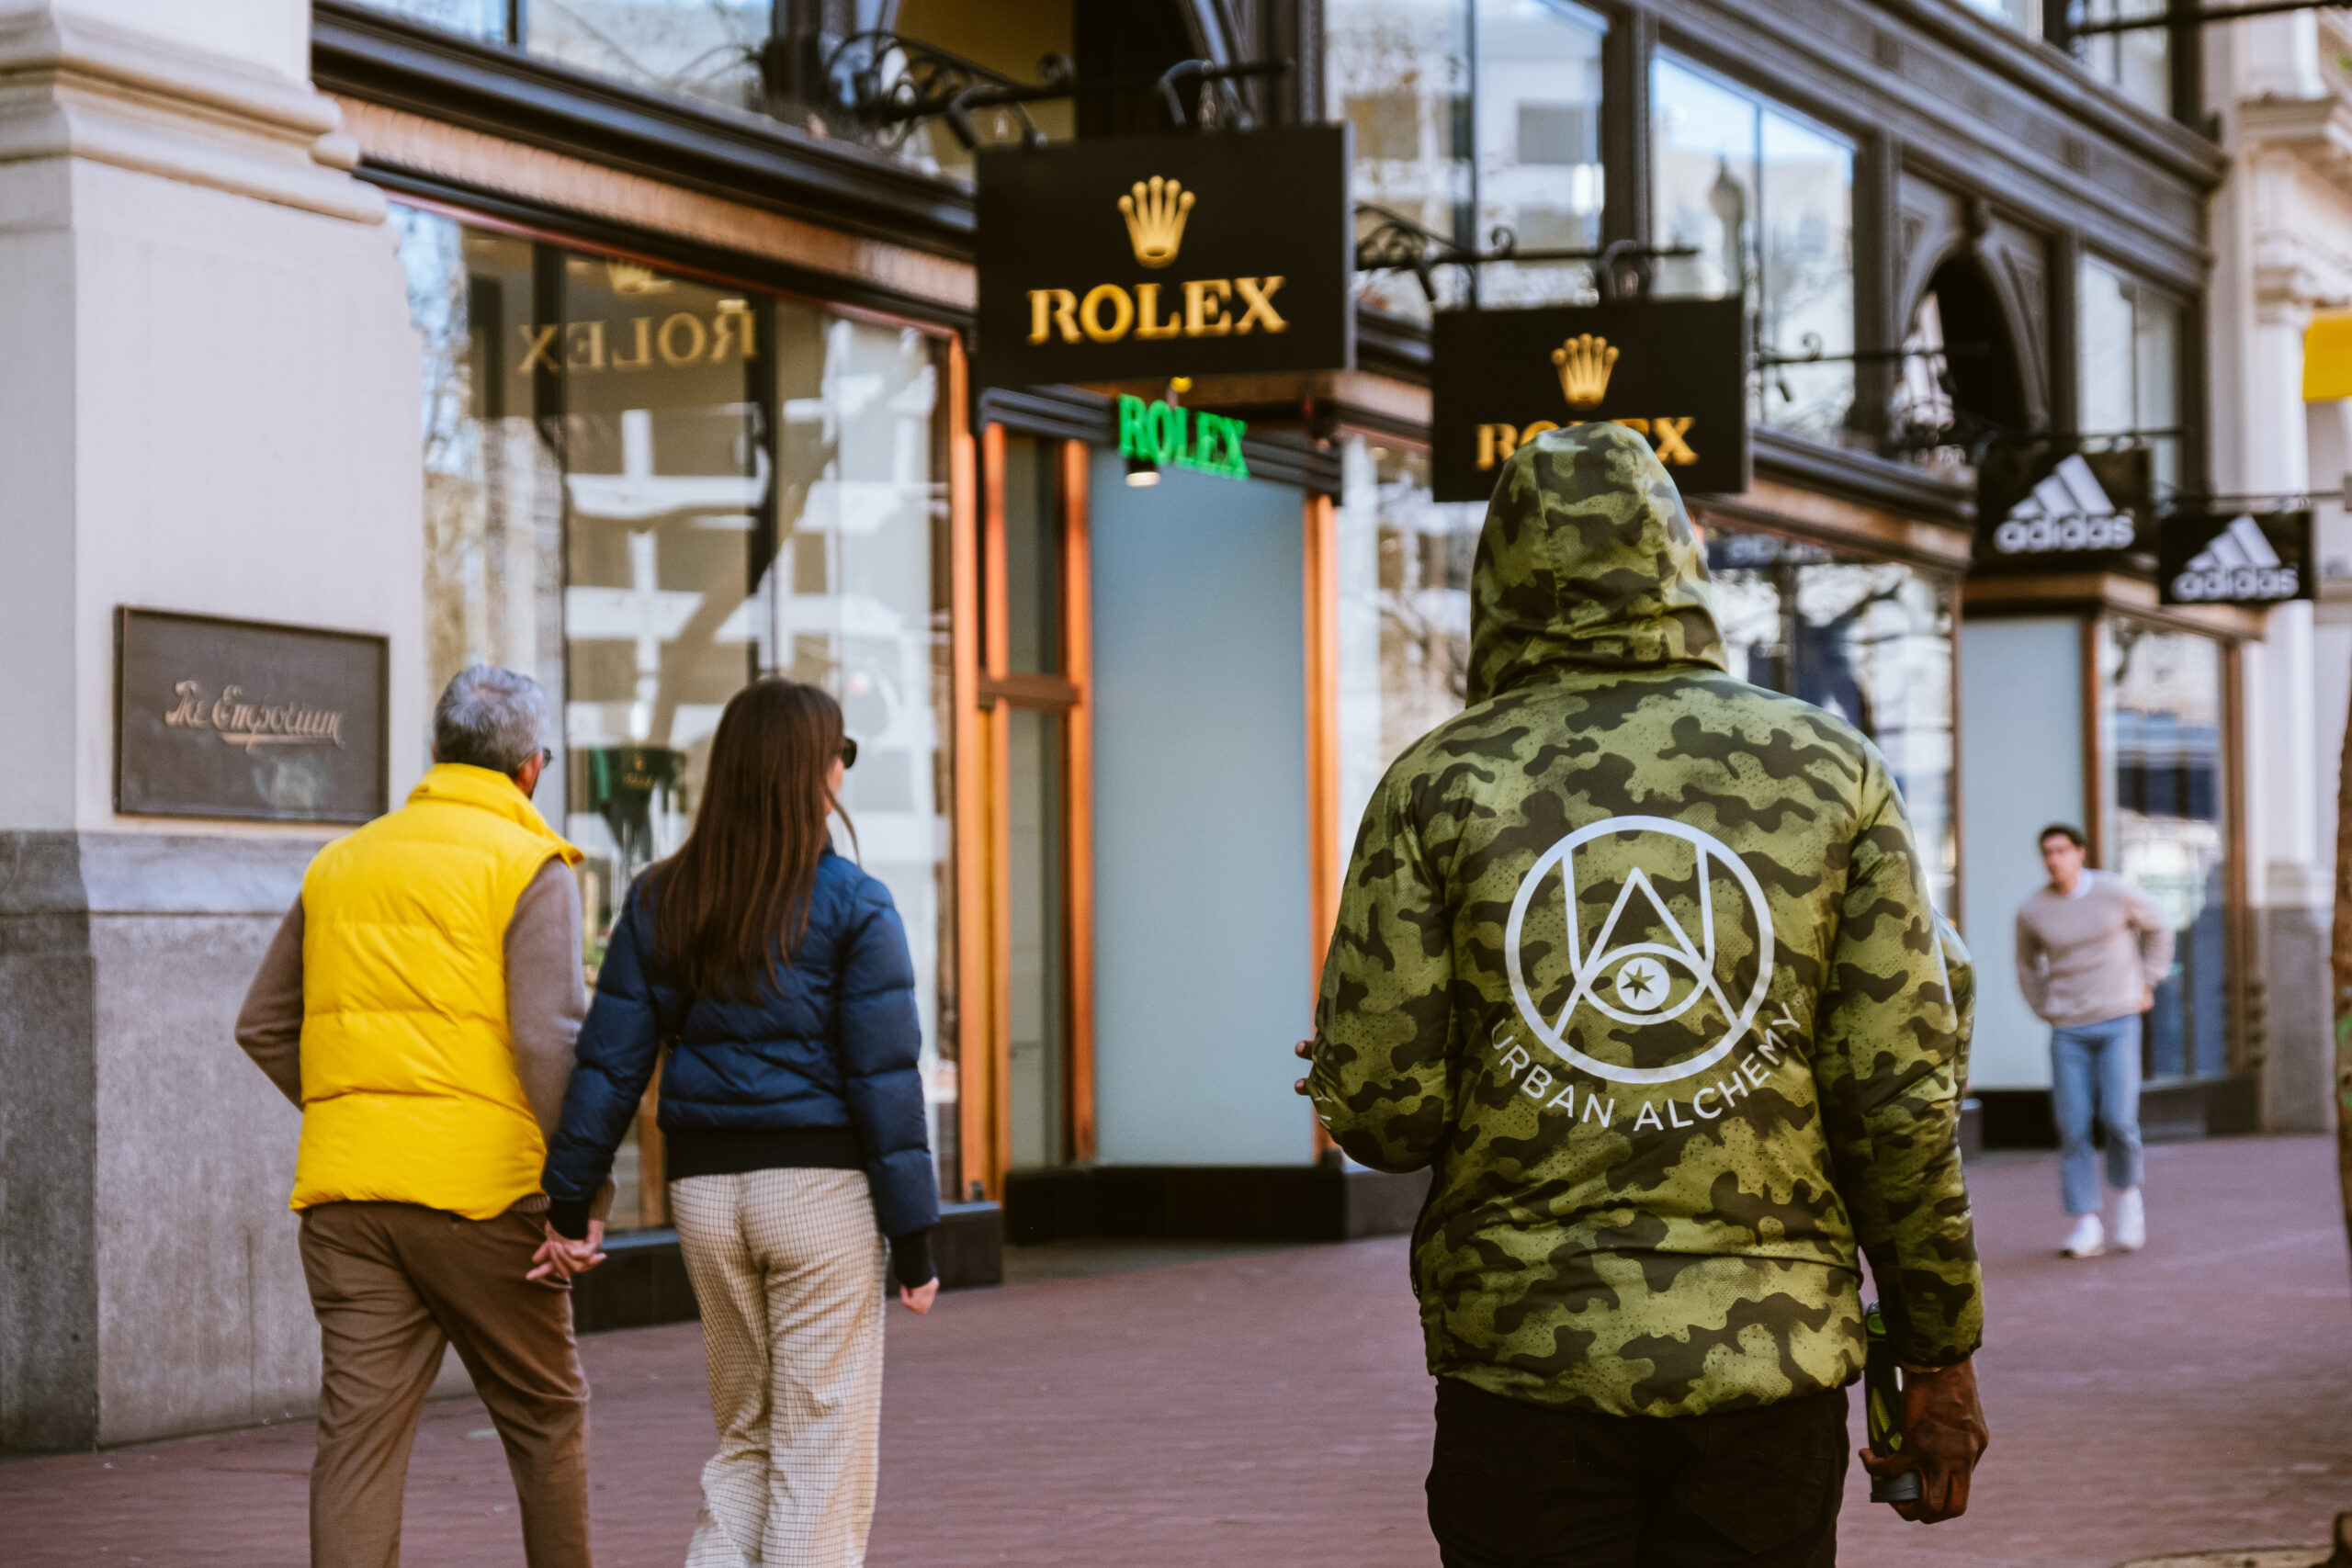 A person in a camo hoodie walks past Rolex stores; a couple holding hands is also visible.